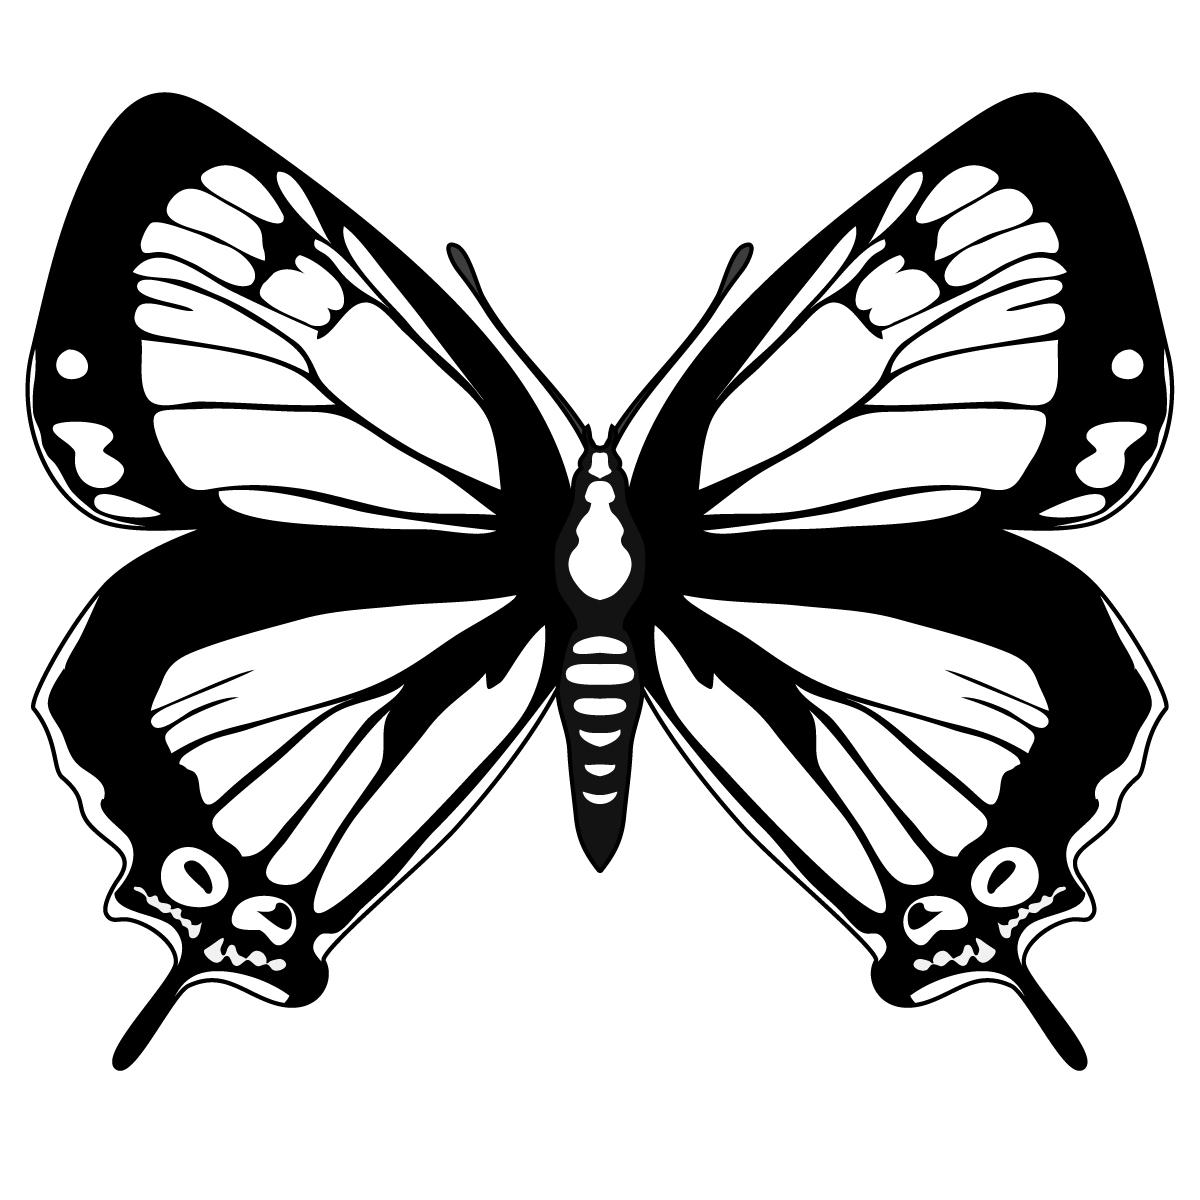 Butterfly Black and White Clip